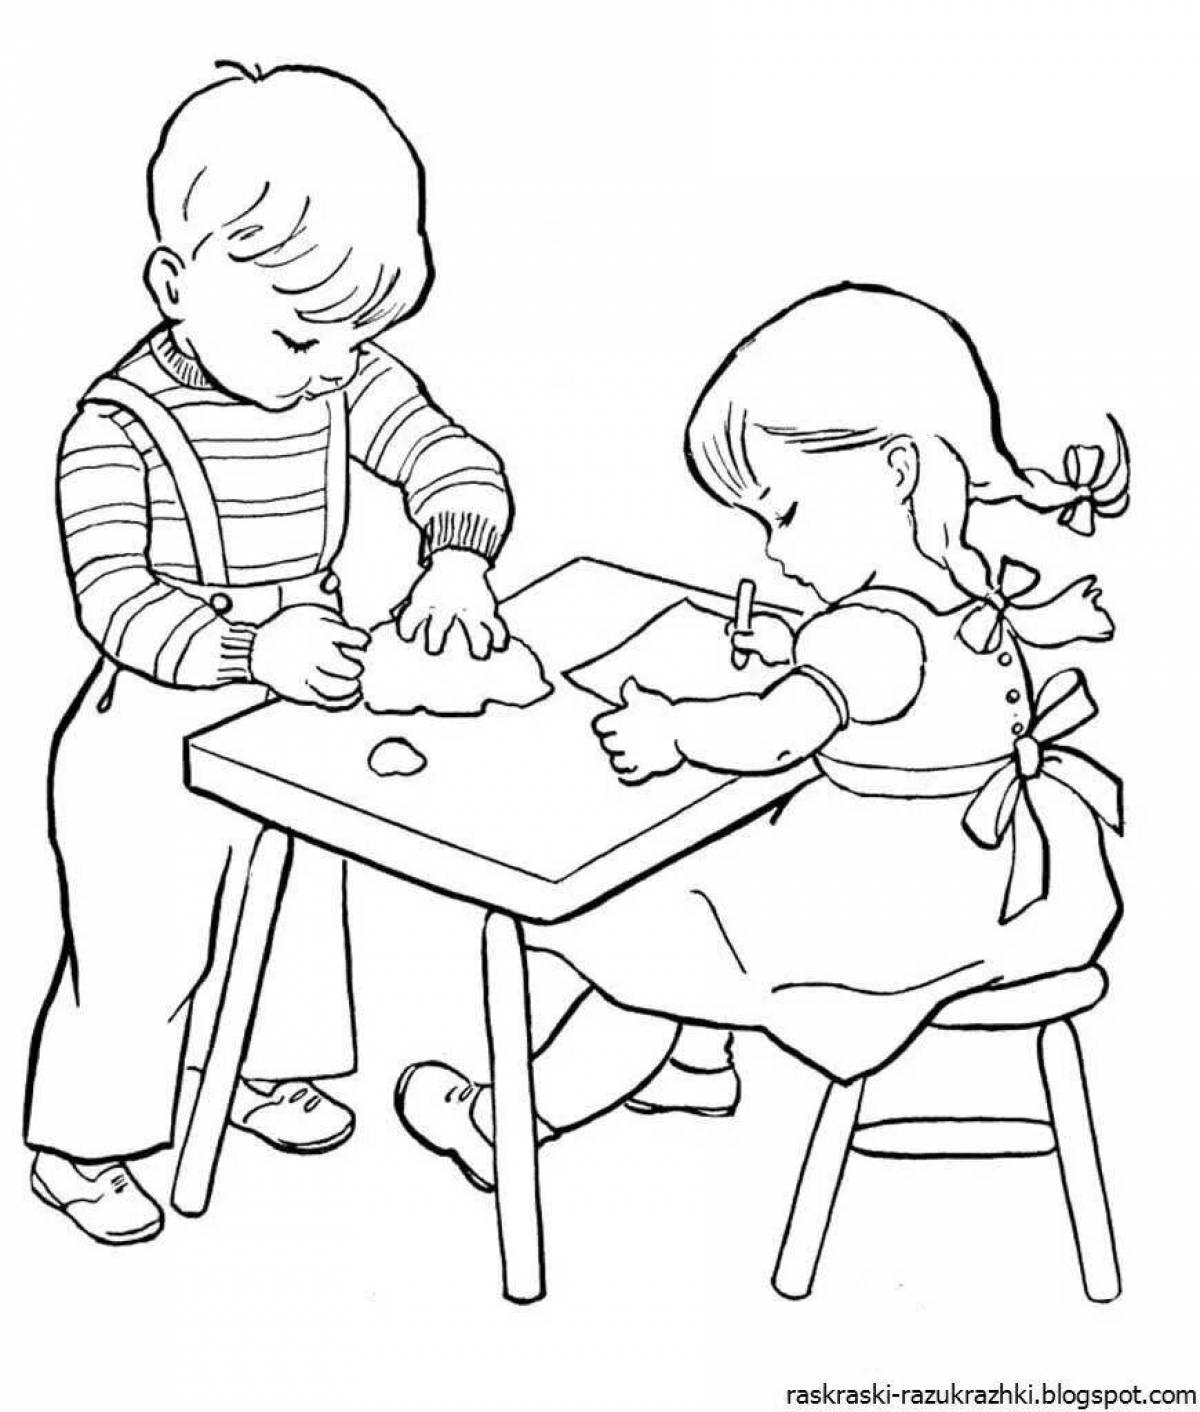 Bright coloring drawing page